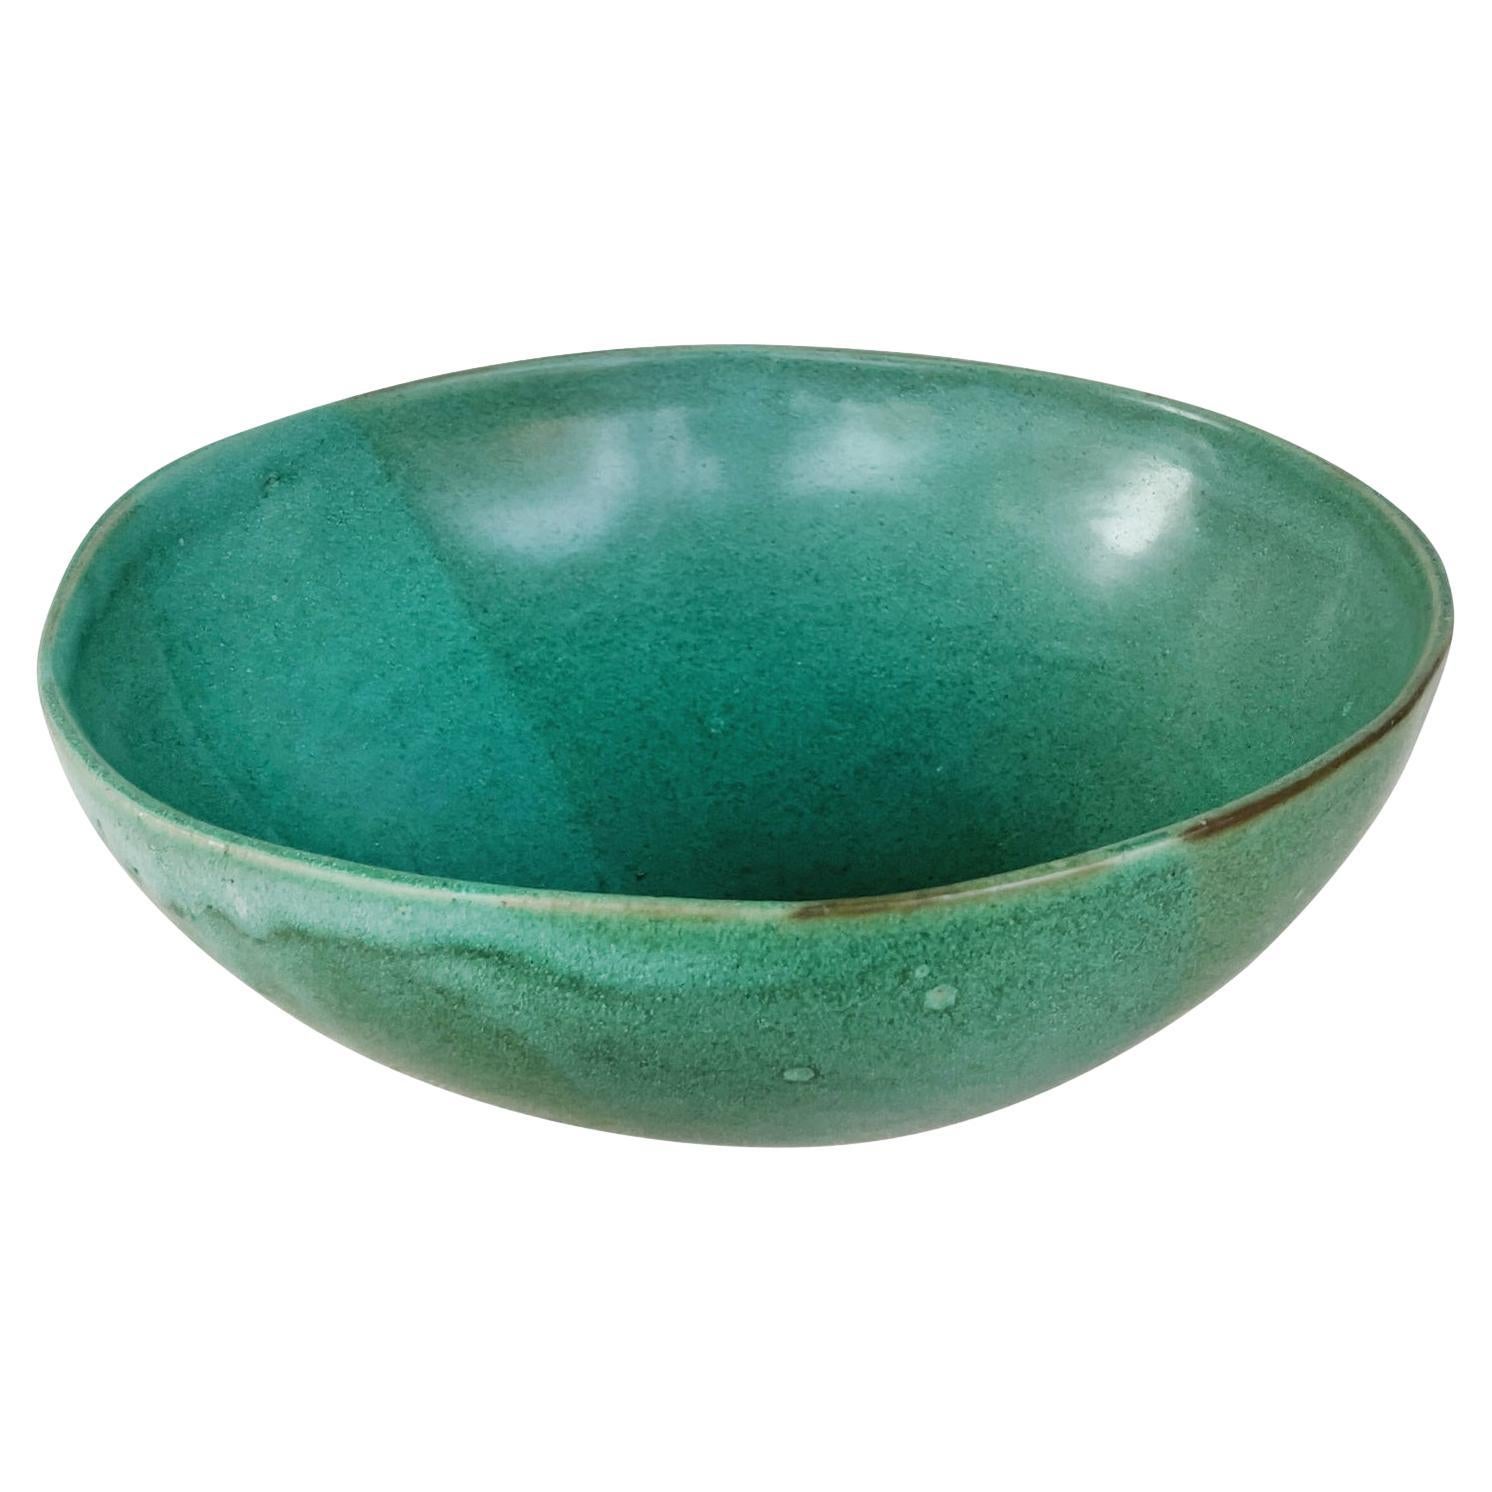 Thom Lussier Ceramic Bowl #23, From the Oxidized Copper Collection Description For Sale